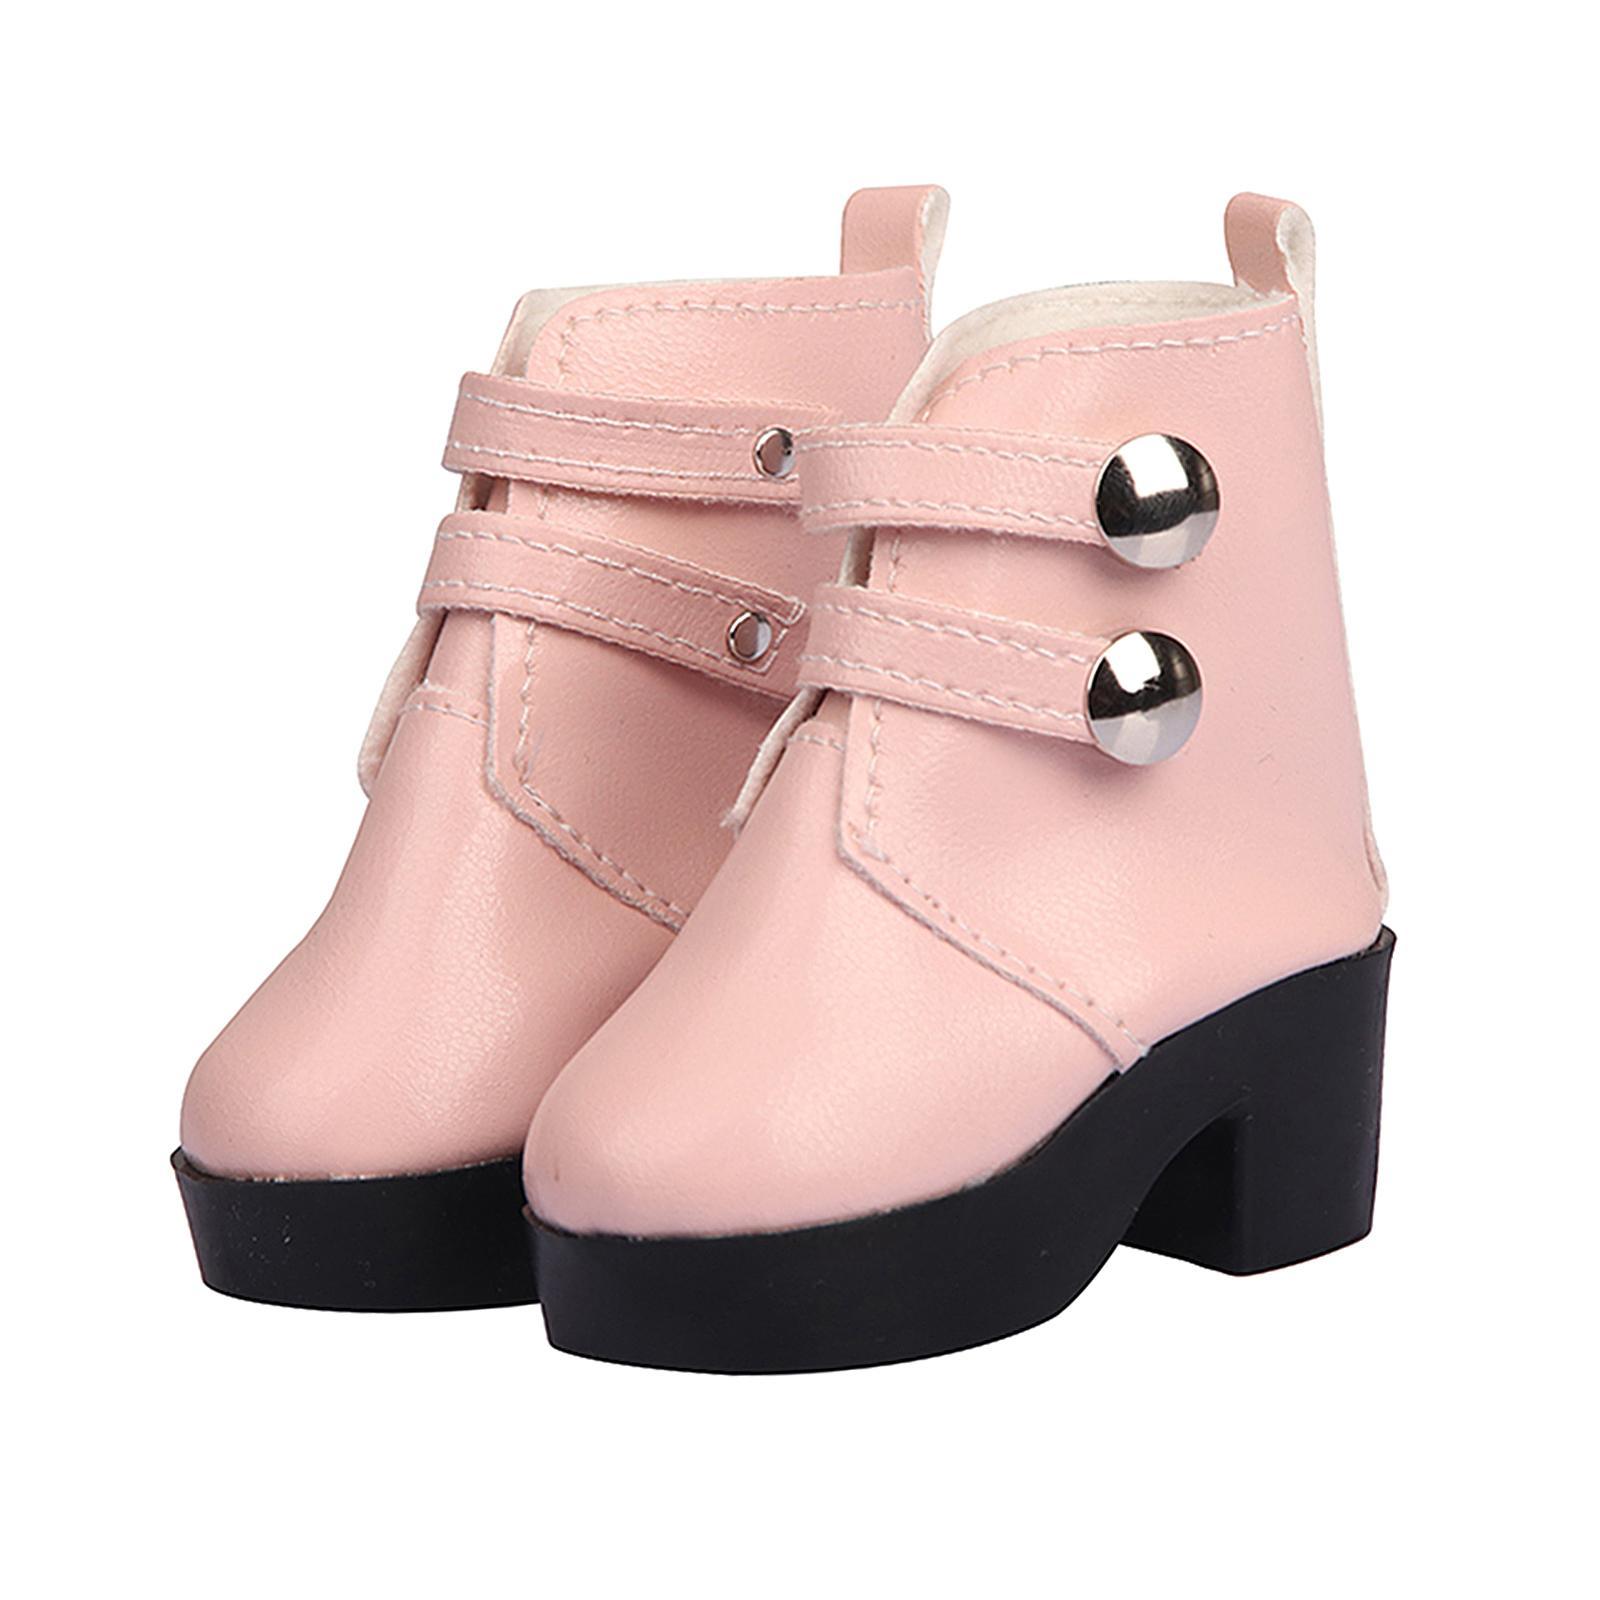 Handmade Doll PU leather Boots Shoes for 18" Inch American Doll Accs Pink